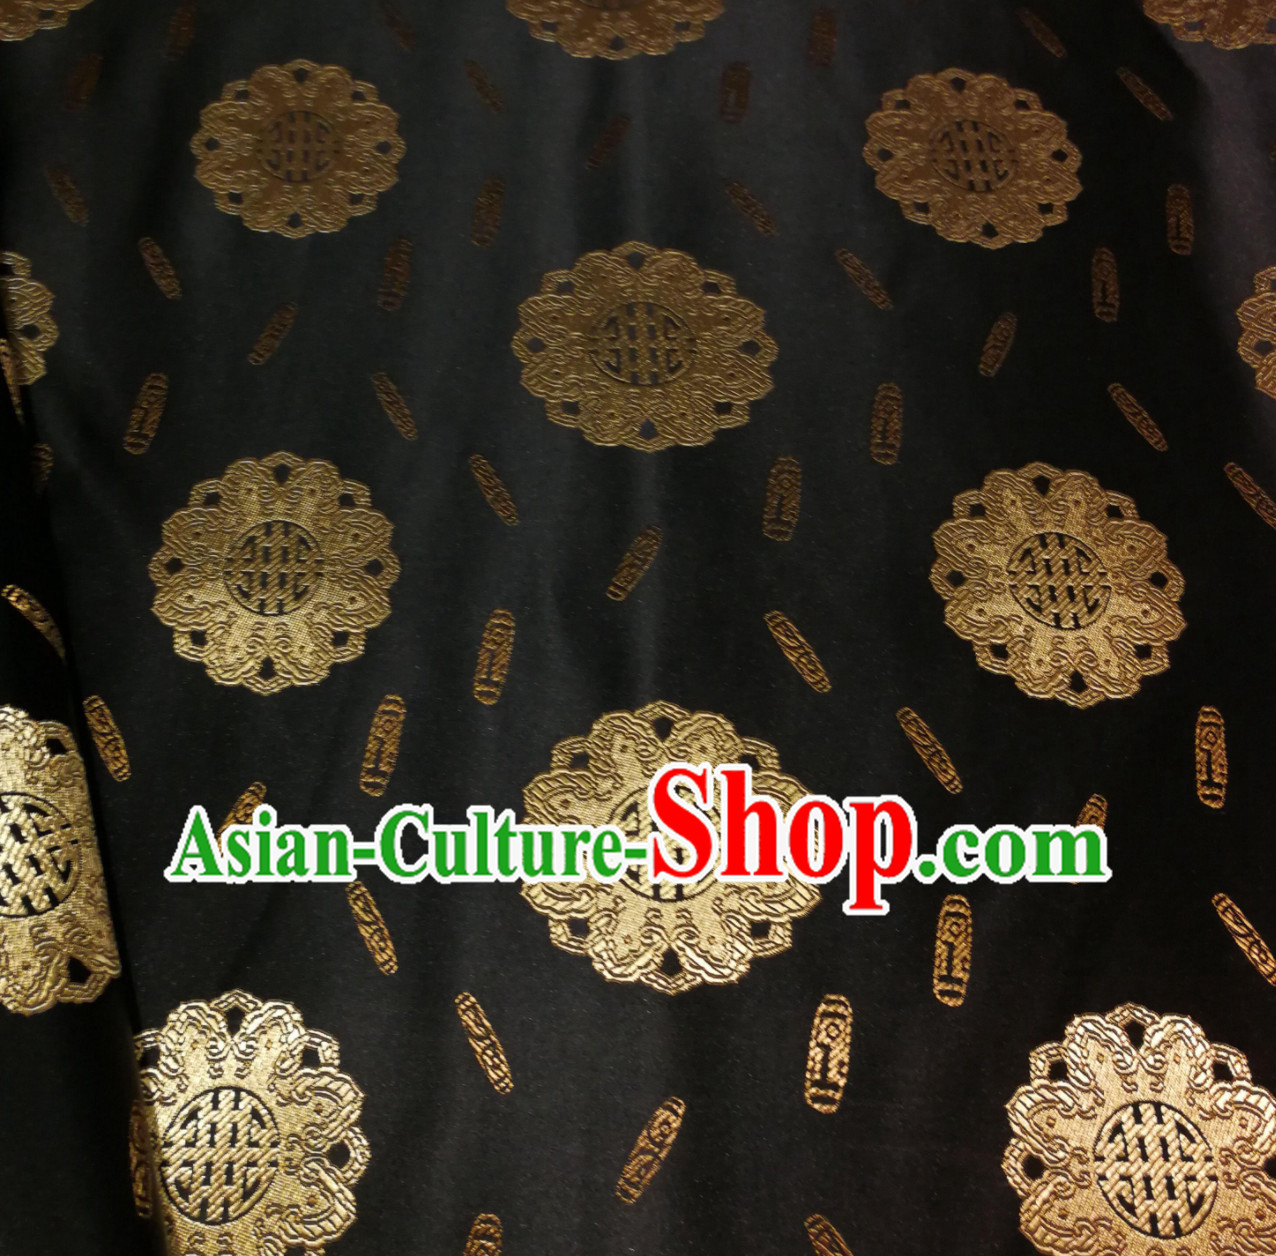 Black Color Chinese Royal Palace Style Traditional Pattern Design Brocade Fabric Silk Fabric Chinese Fabric Asian Material